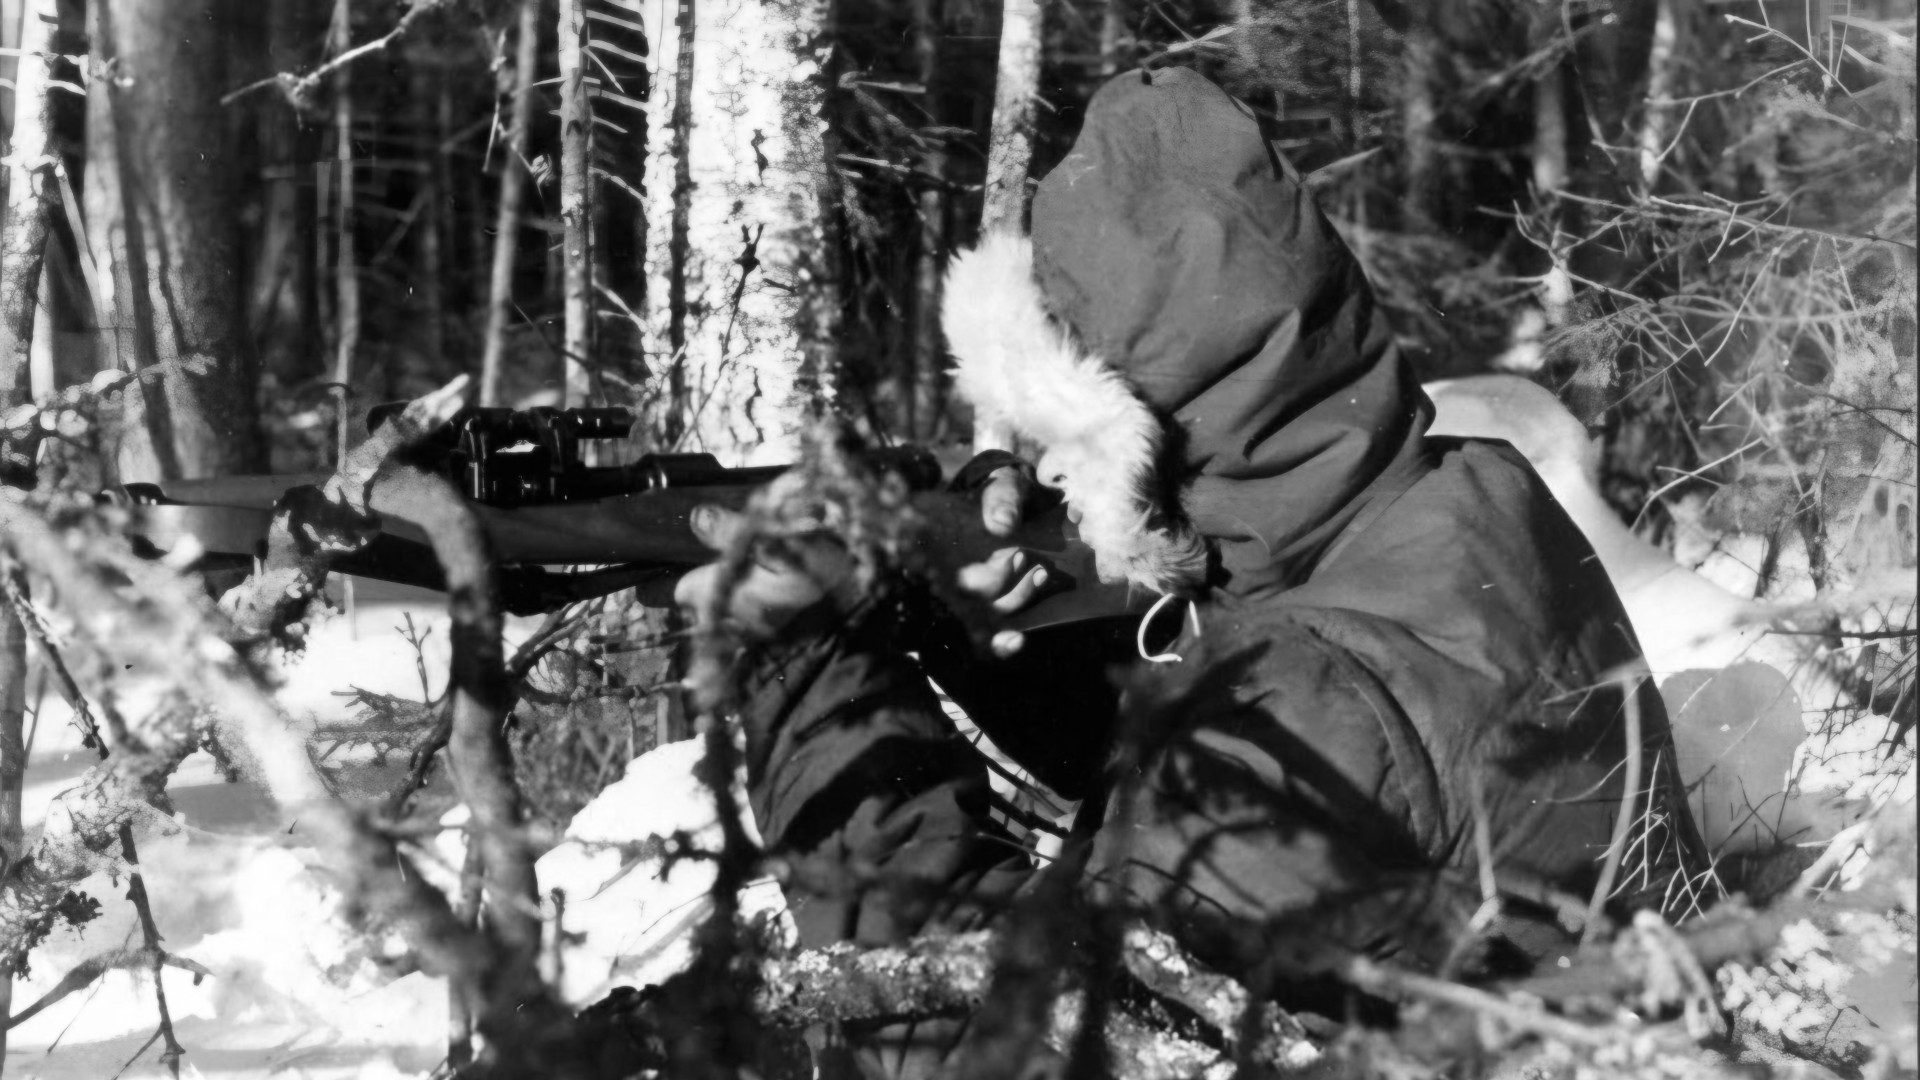 Why we fear and admire the military sniper - The Boston Globe